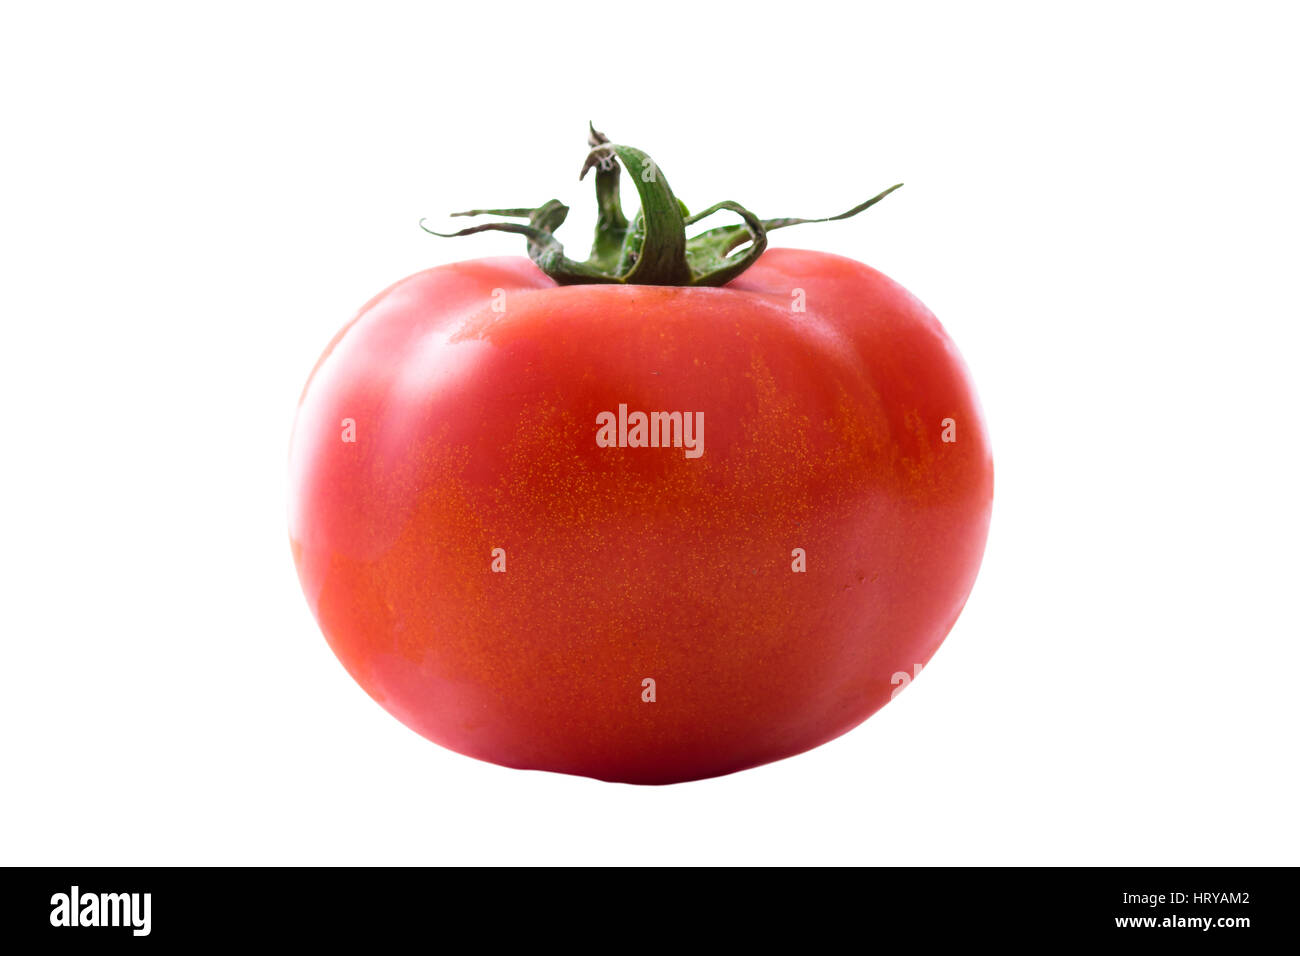 Close up photo of a single ripe organic tomato, isolated in front of a white background Stock Photo